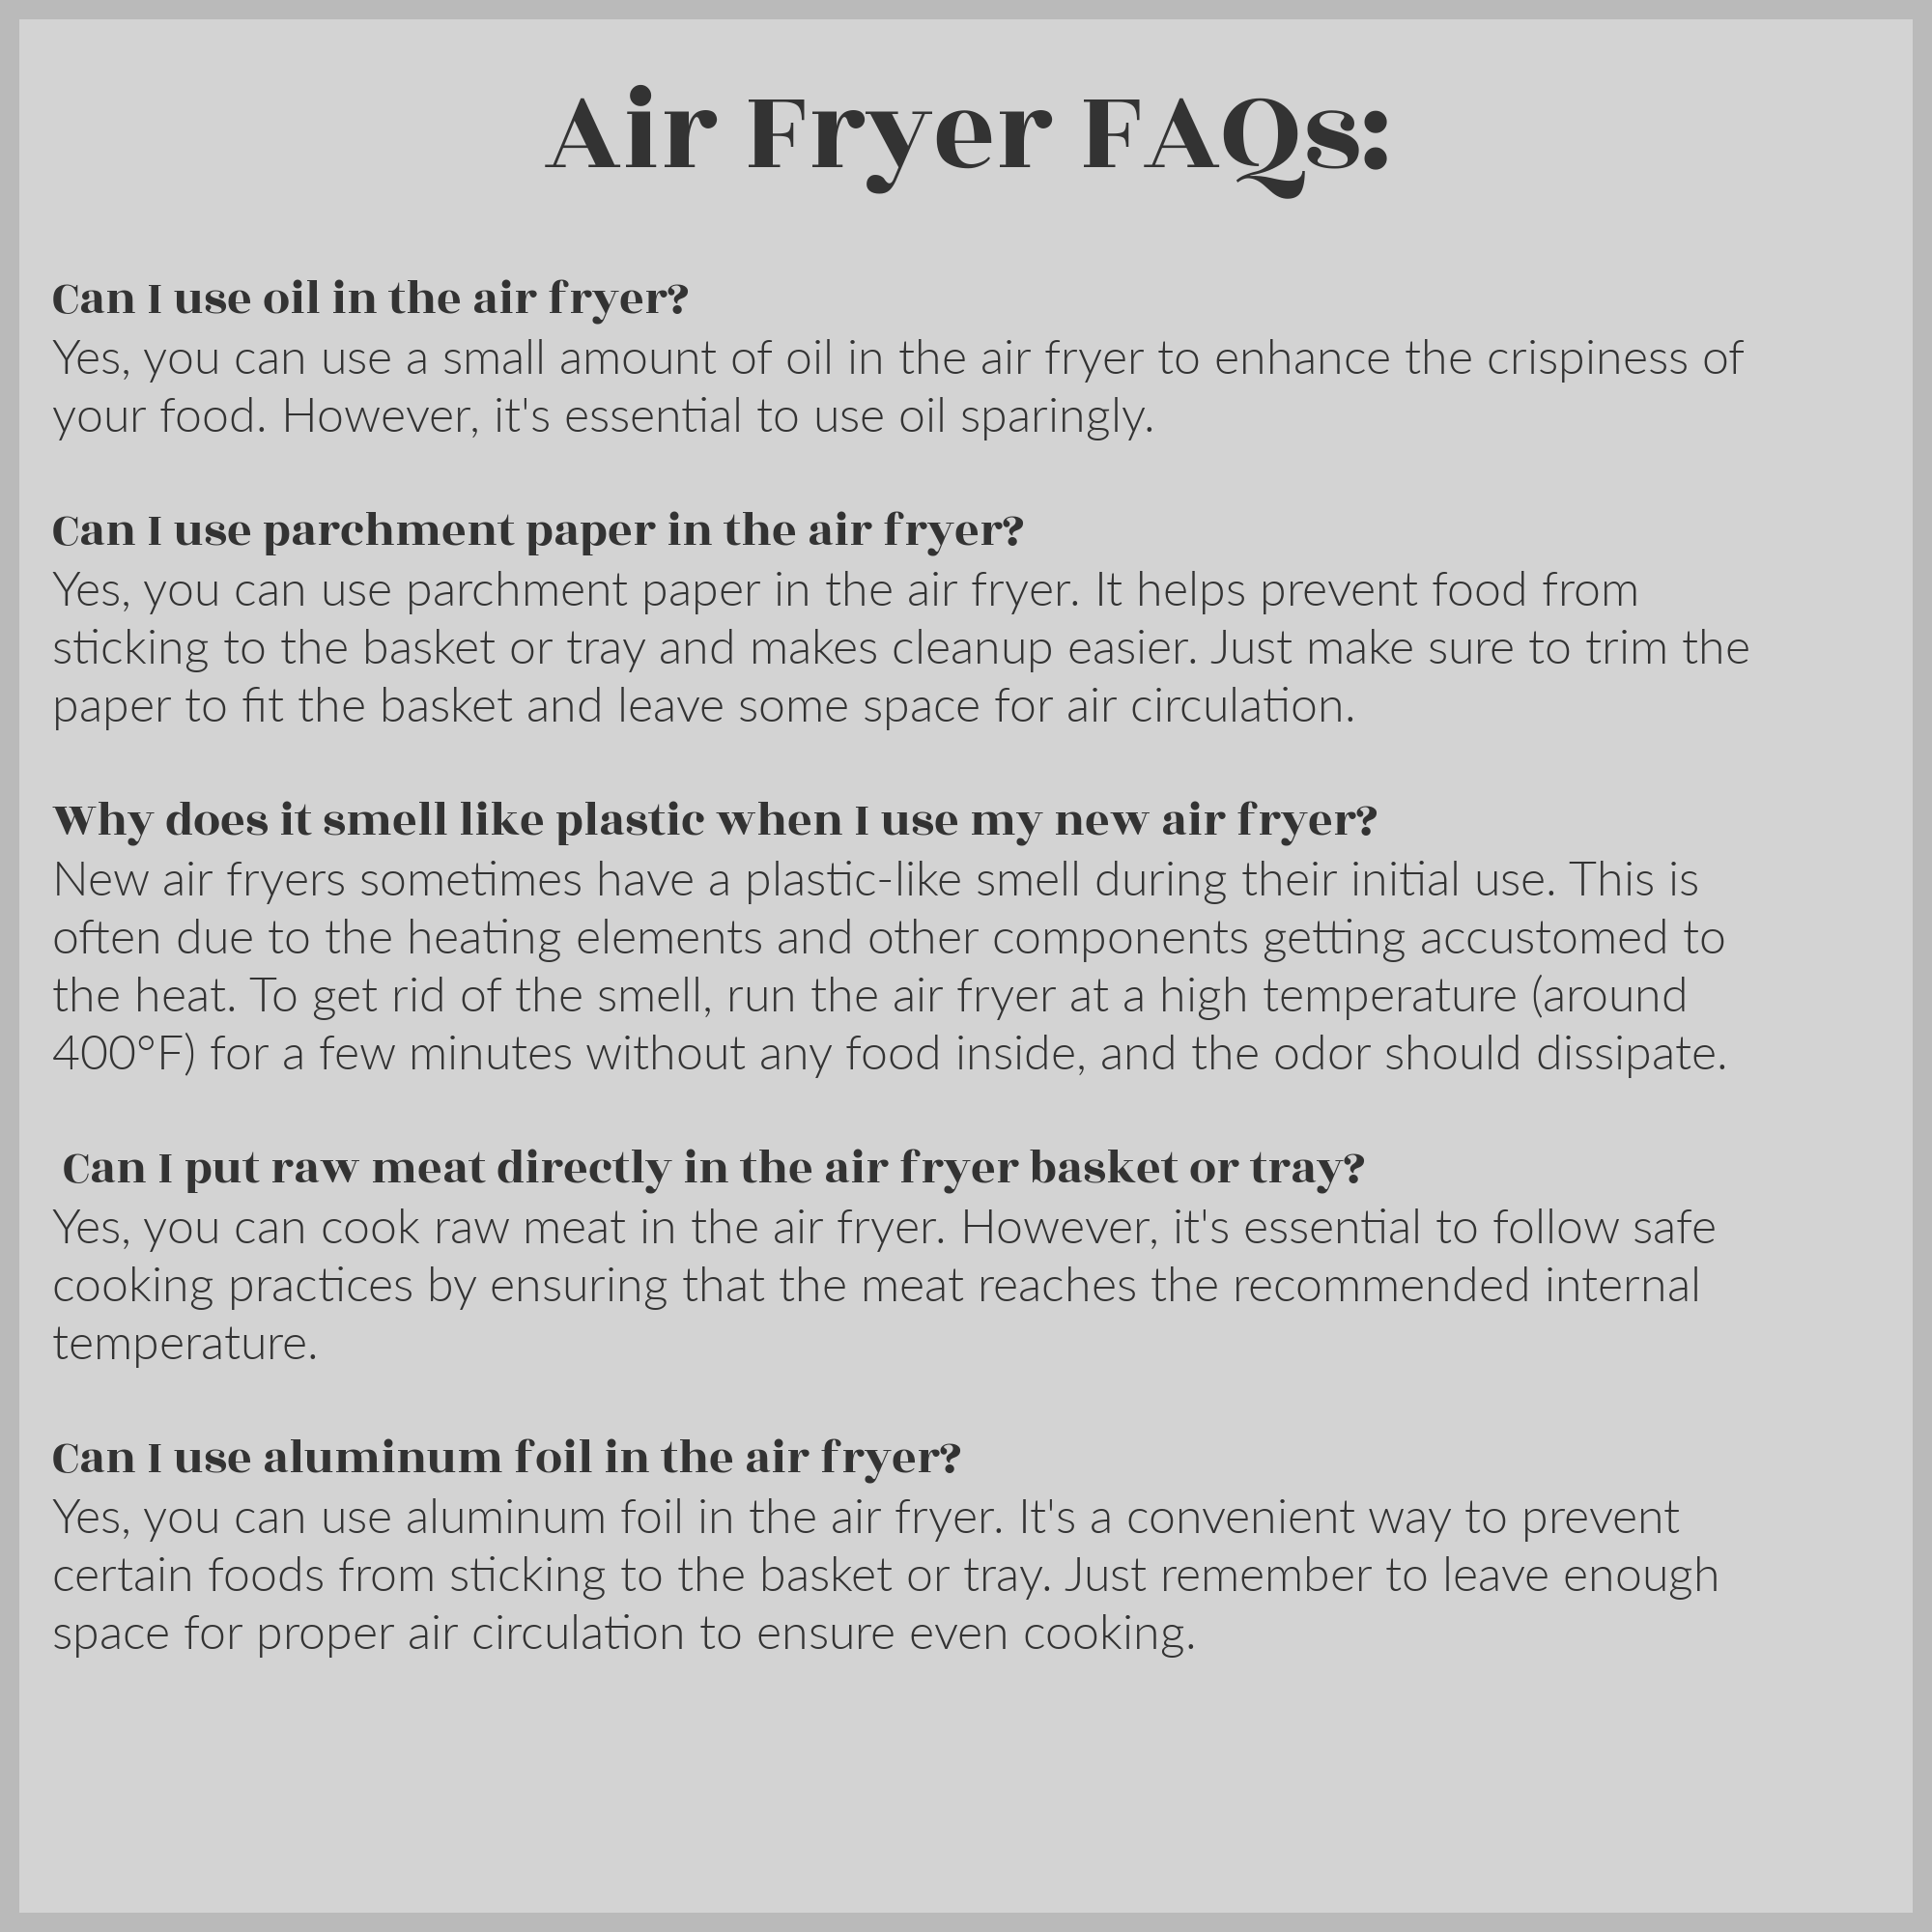 the most common questions people ask when using an air fryer